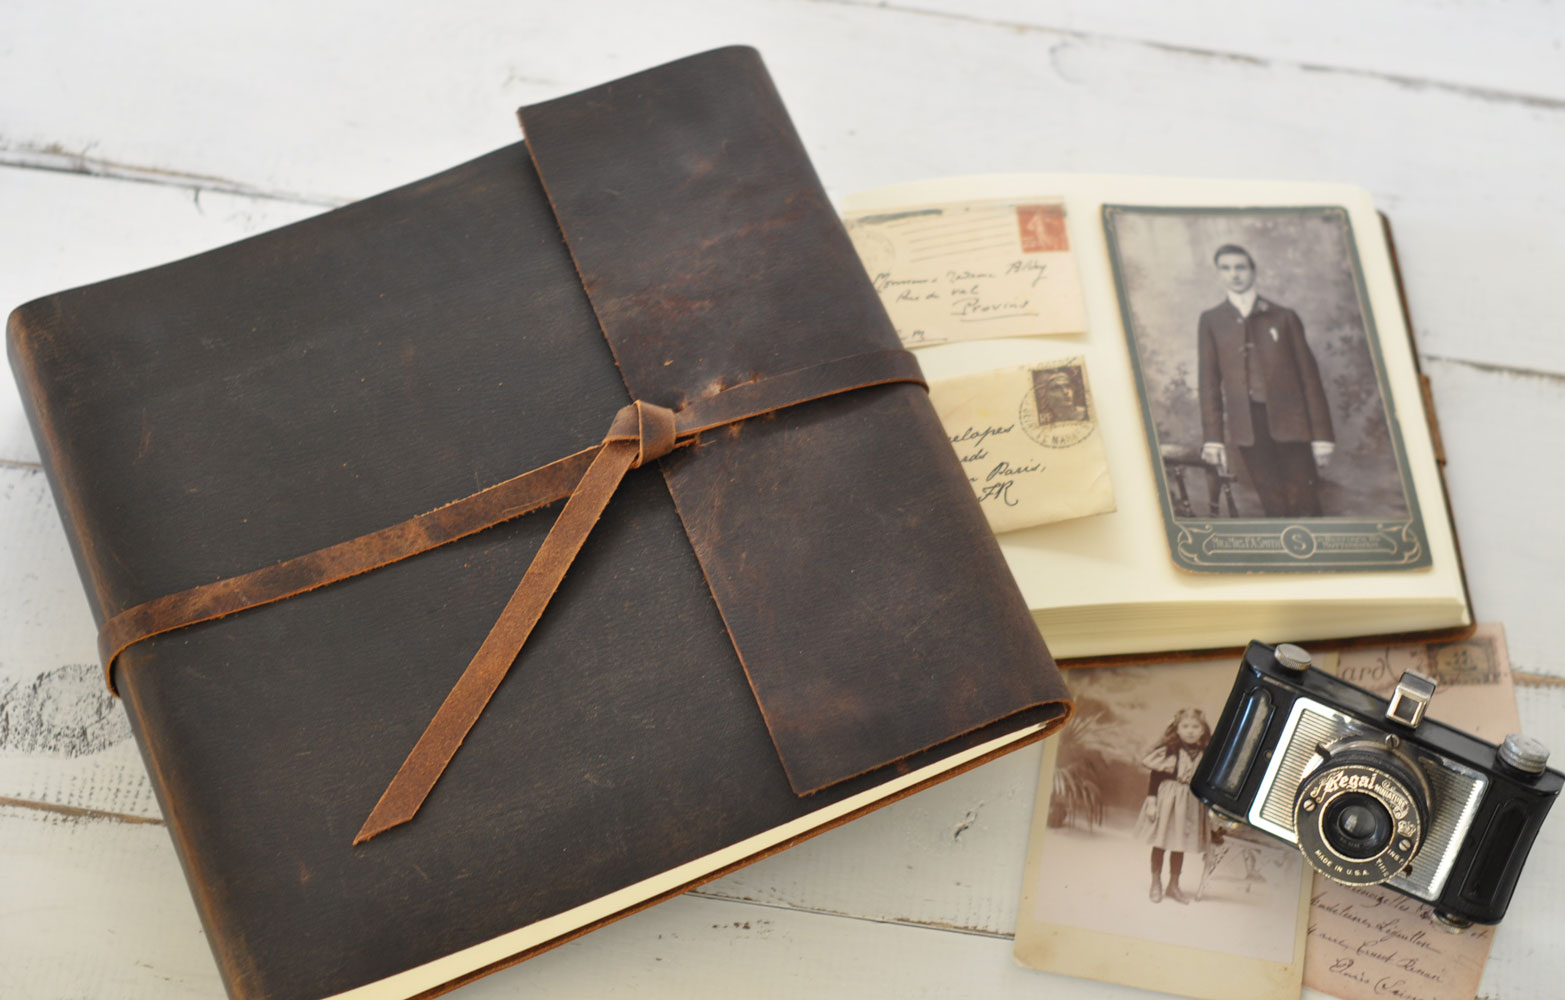 Fathers Day Gift Ideas - handmade leather rustic photo album - a great keepsake that can be personalized!